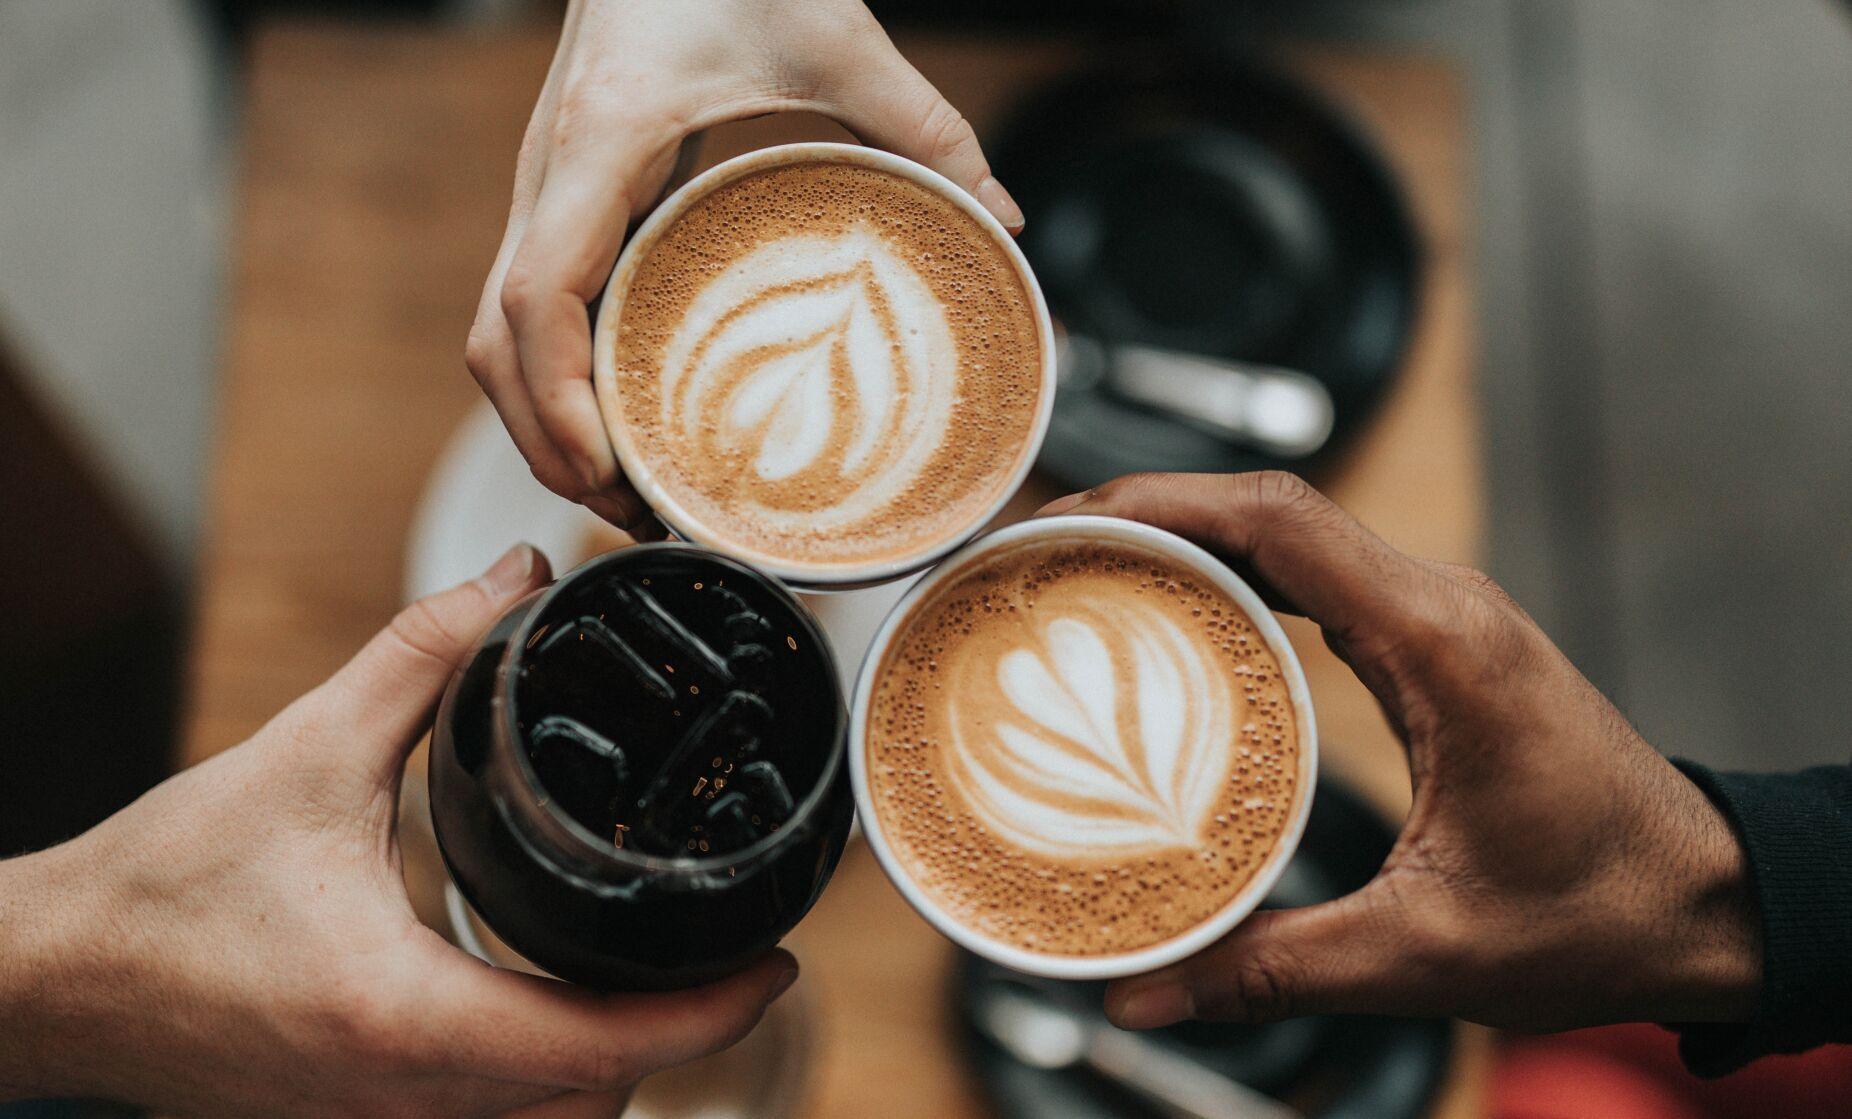 Celebrate National Coffee Day with these TikTok barista recipes